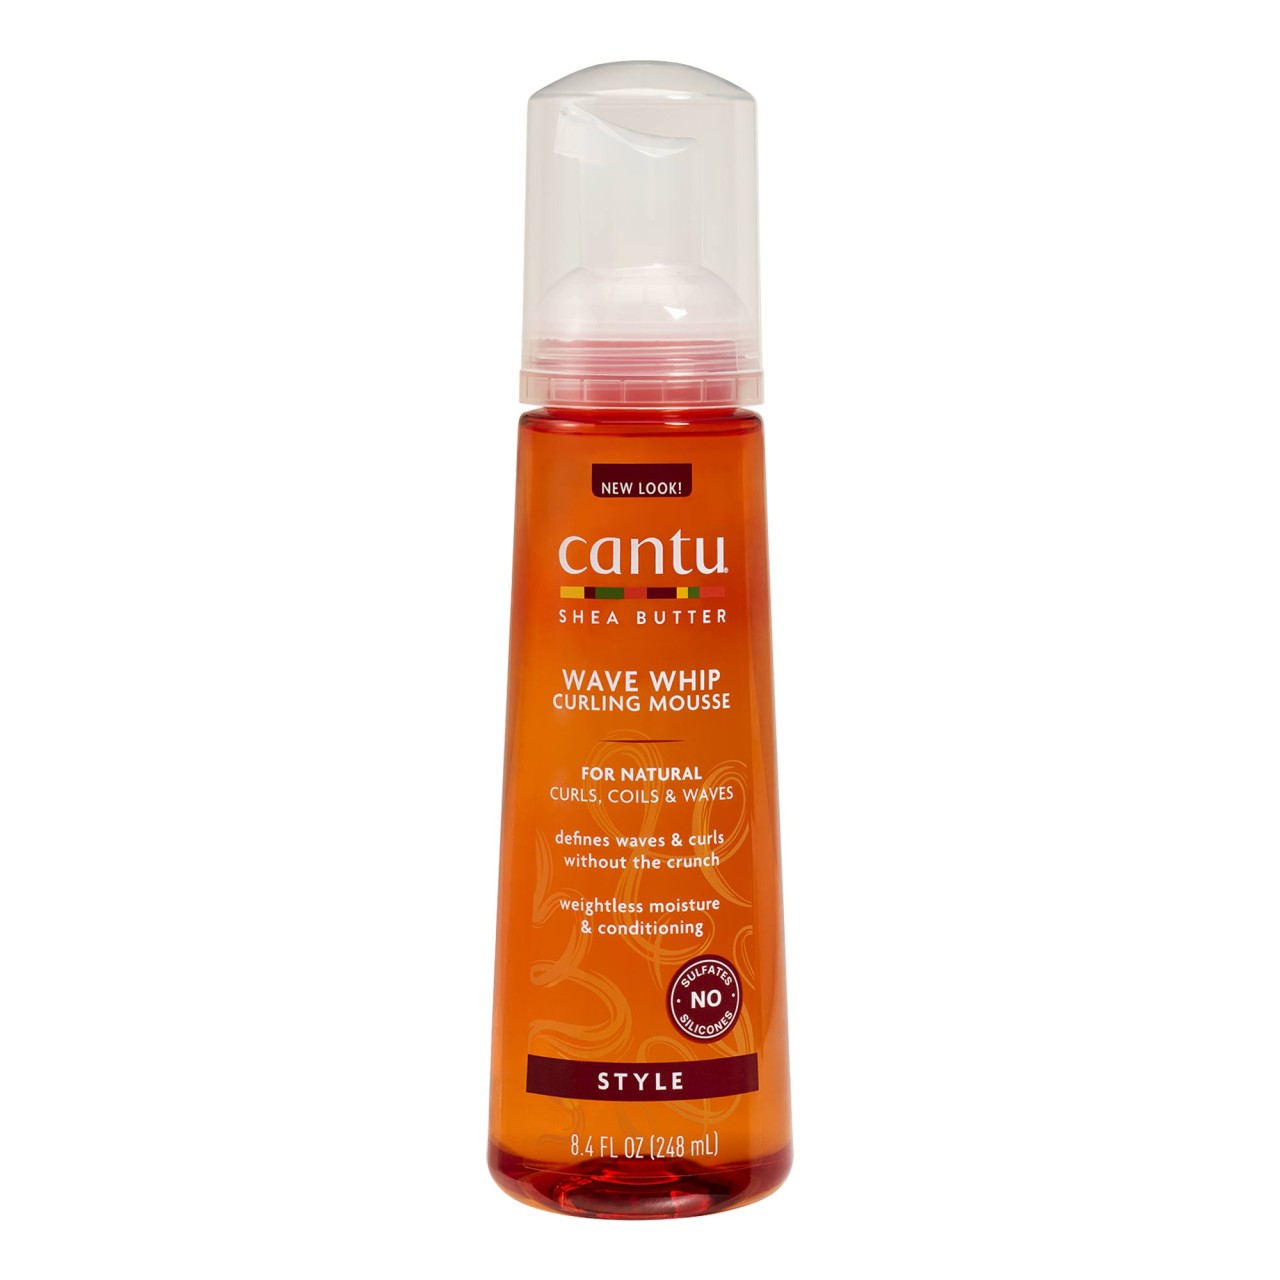 cantu - Shea Butter Wave Whip Curling Mousse - 